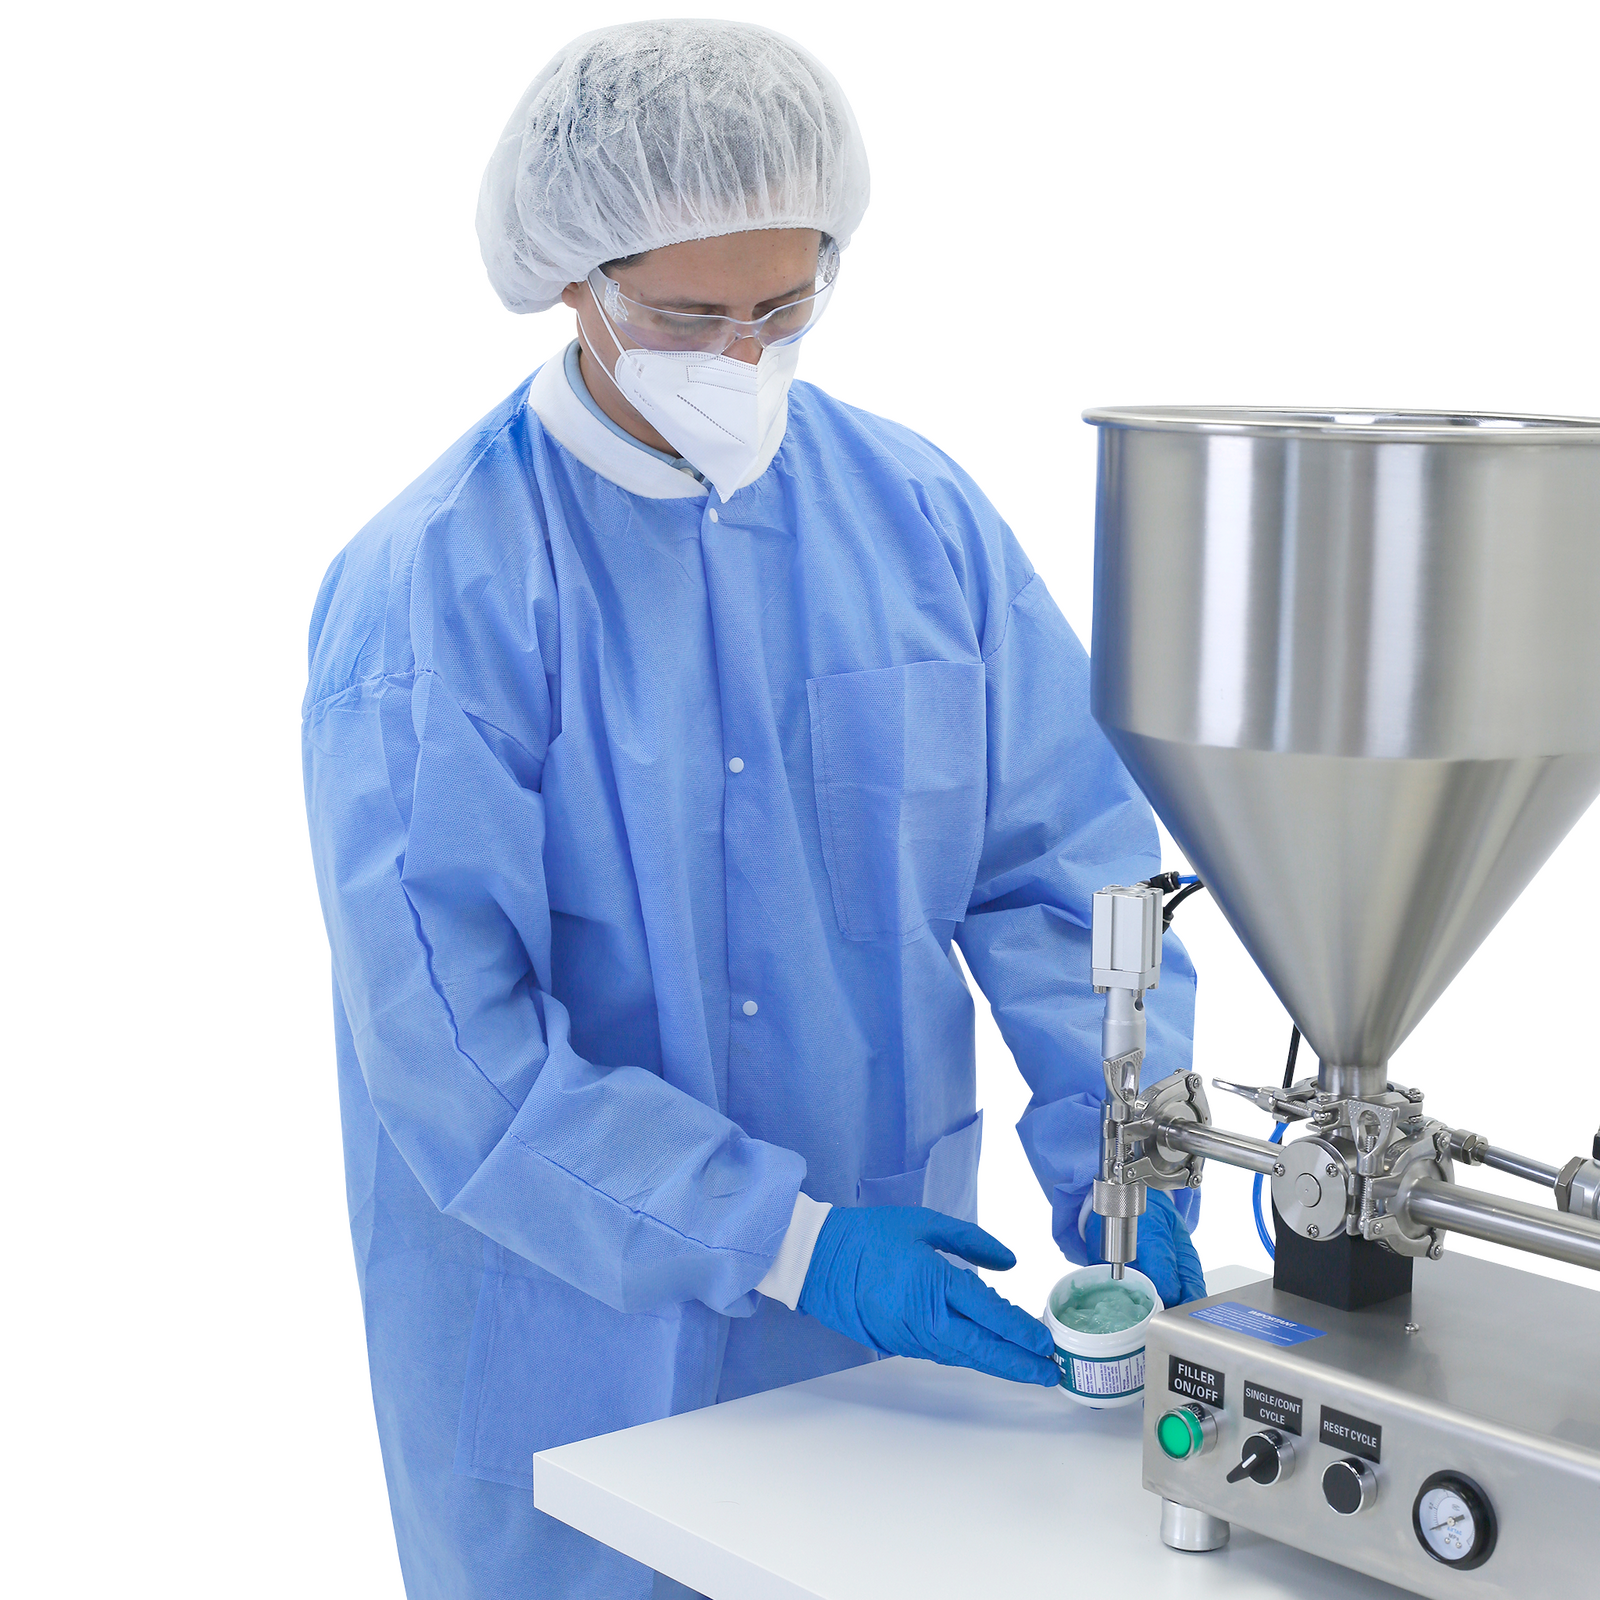 An operator wearing PPE clothing and disposable gloves standing in front of the nozzle of a Piston filler. He is removing a container filled with a blue viscos gel after been filled by the stainless steel JORES TECHNOLOGIES® piston filler with hopper that is placed on top of a working table